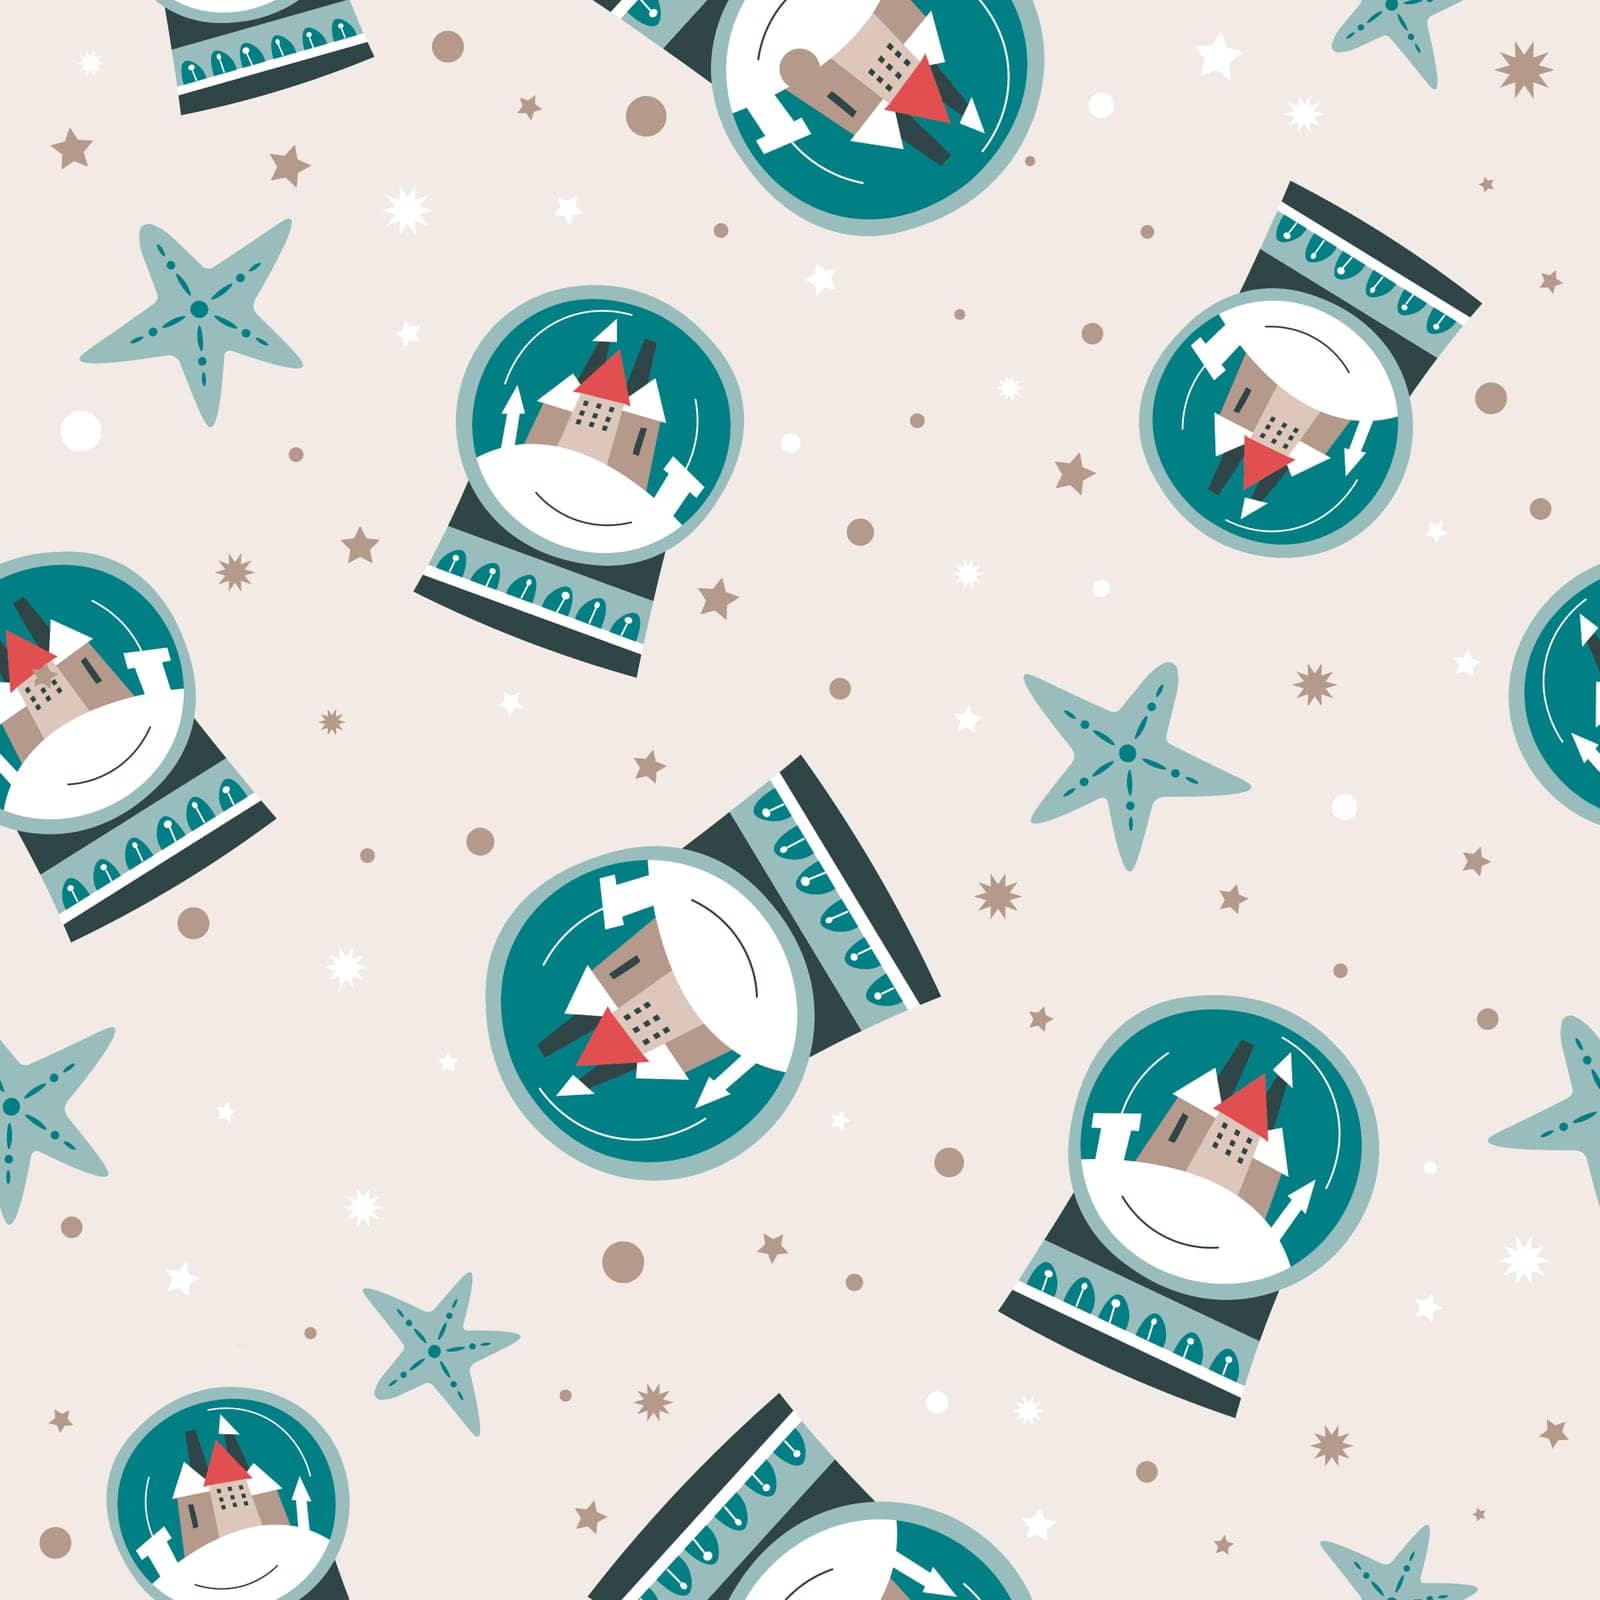 Merry Christmas and happy new year, winter holidays symbols and celebration traditions. Snow globe and stars wrapper for presents. Seamless pattern print, background wallpaper. Vector in flat style